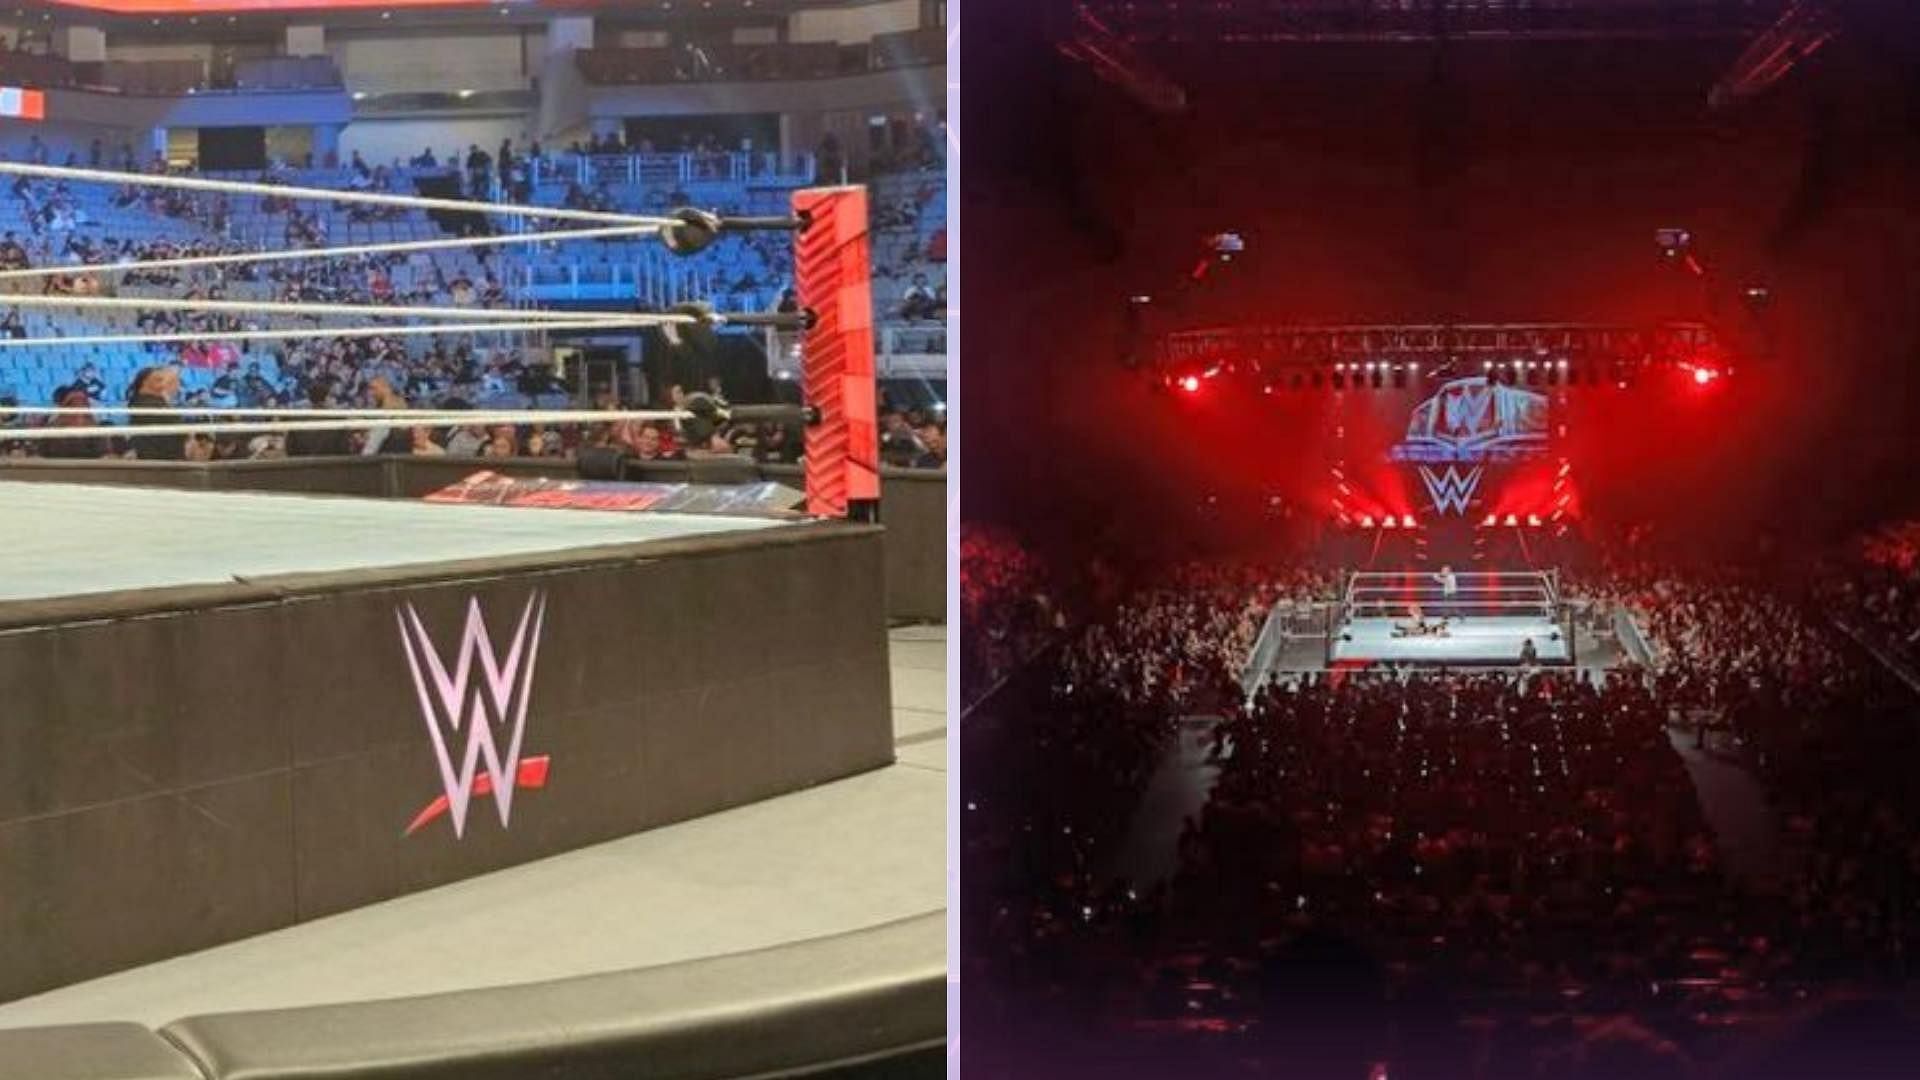 WWE ring and arena